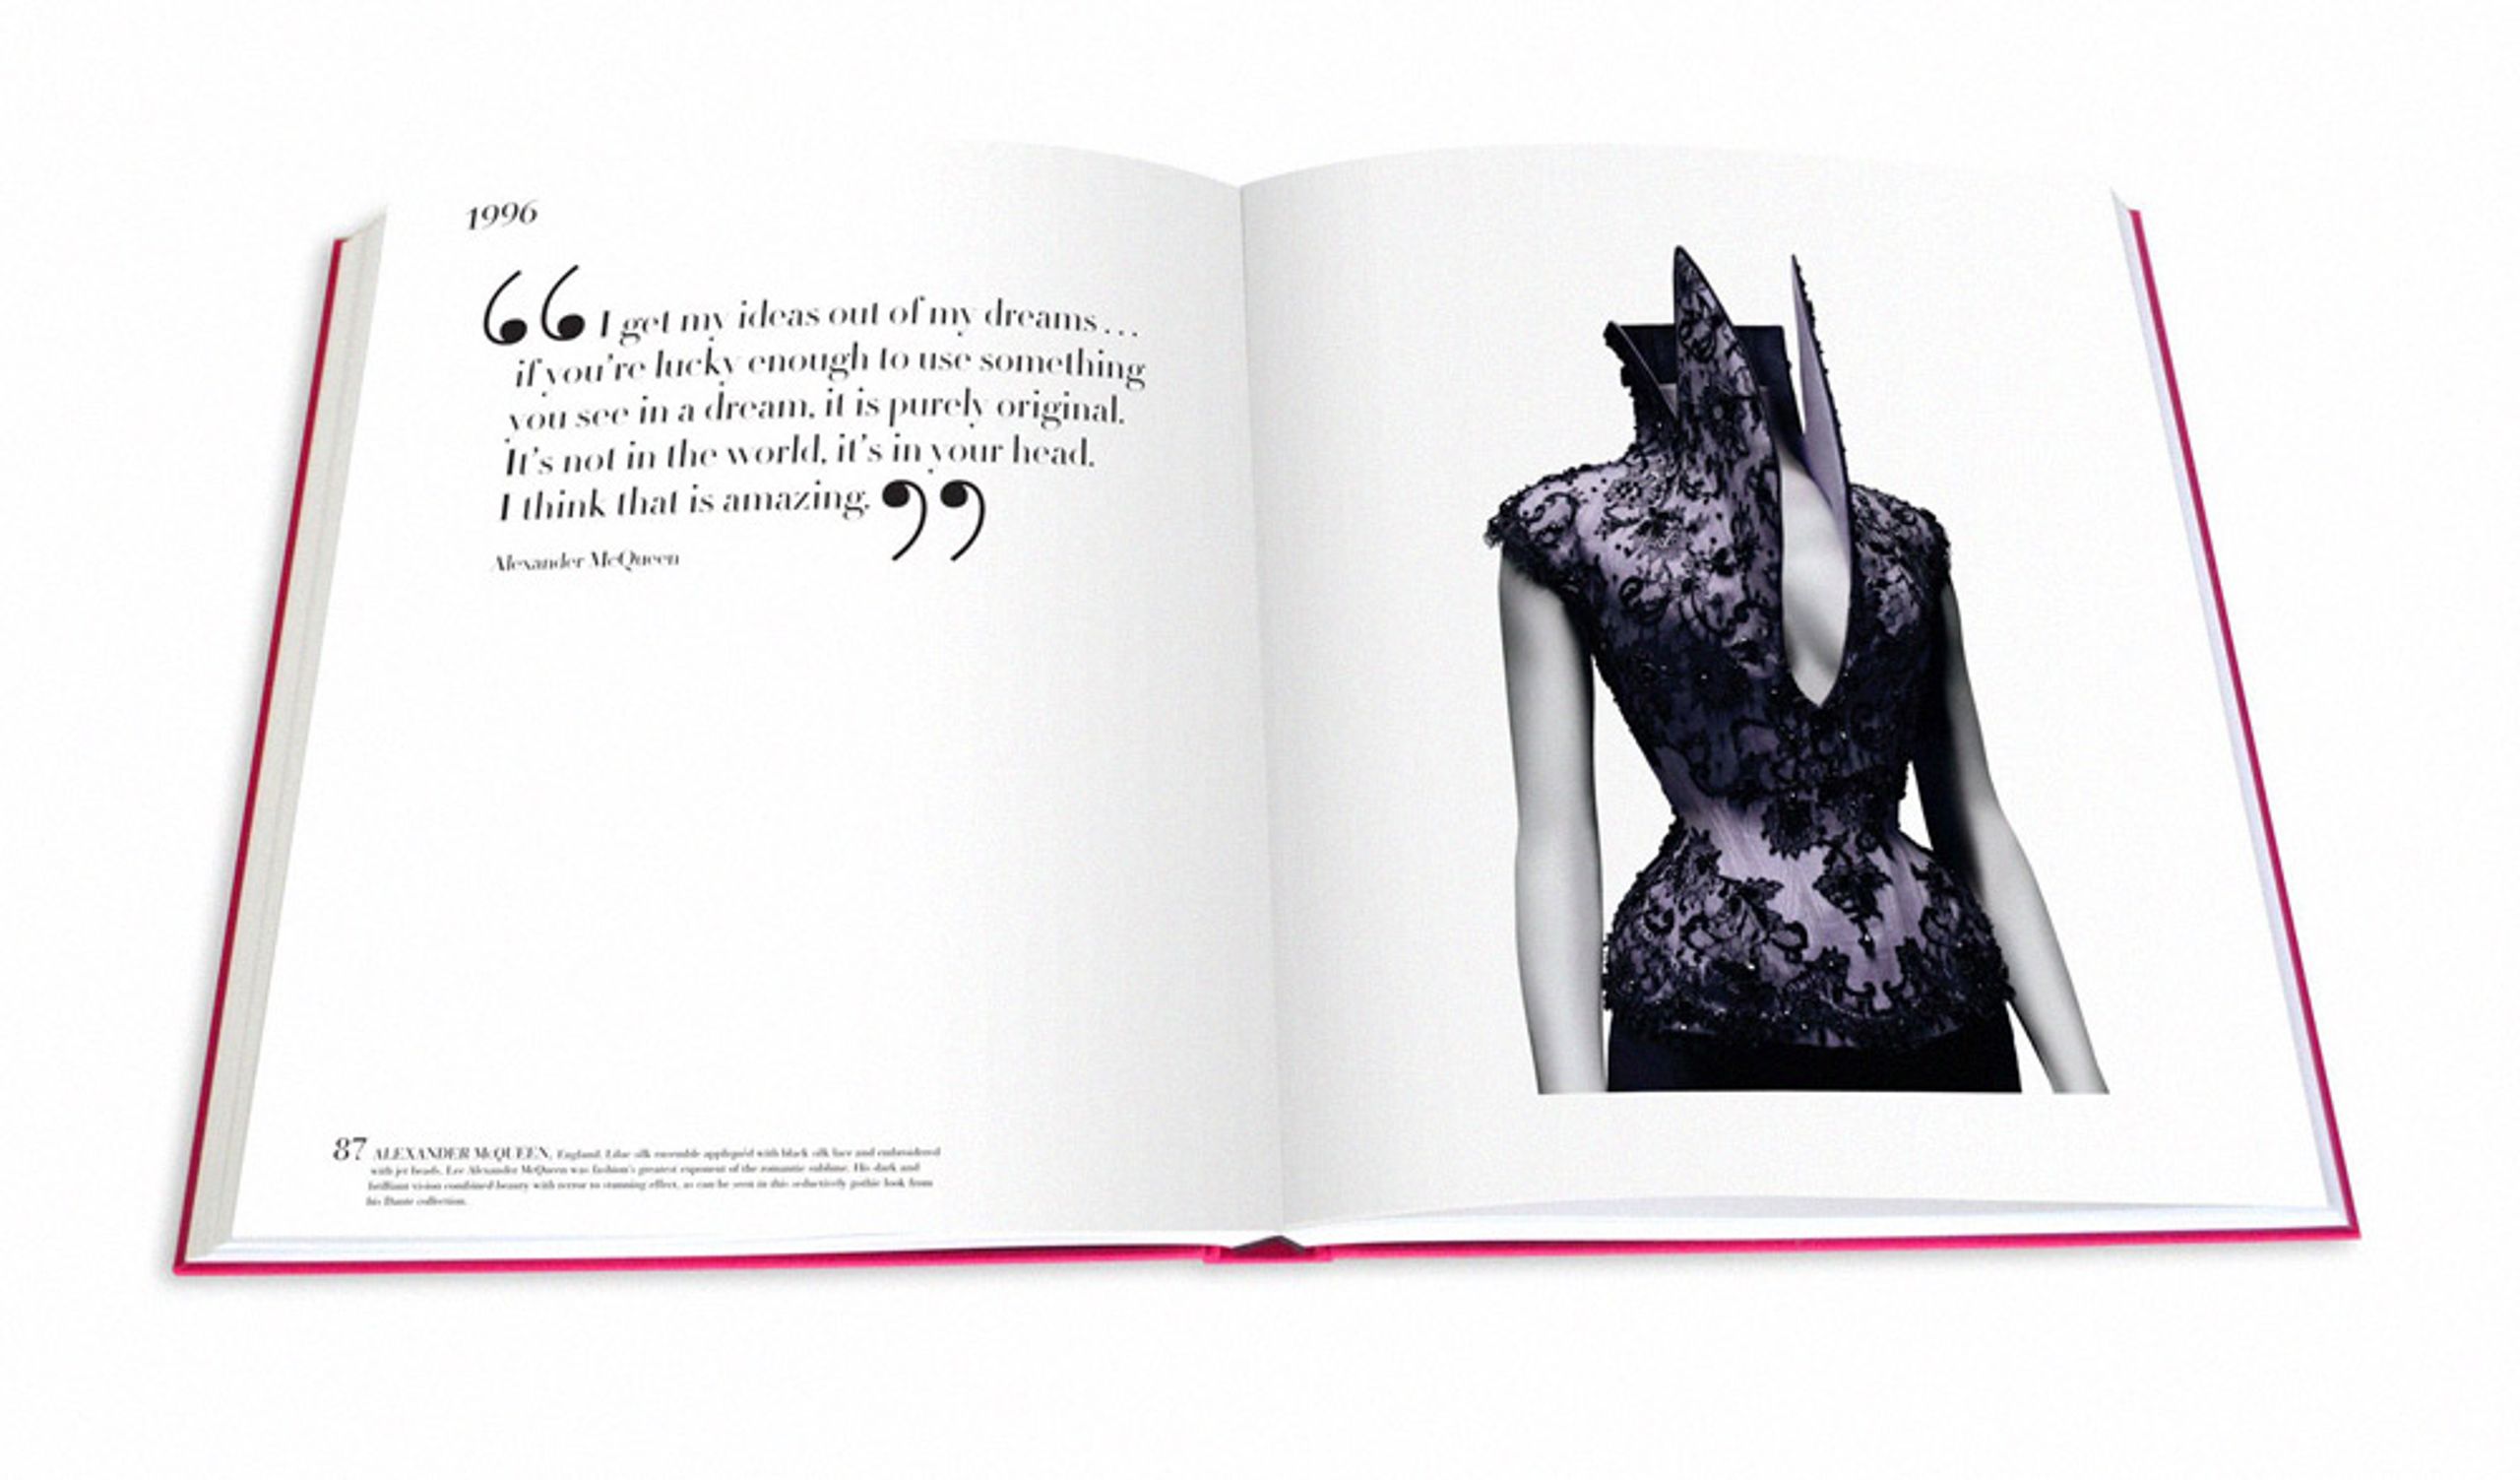 Assouline Chanel: The Impossible Collection Book by Alexander